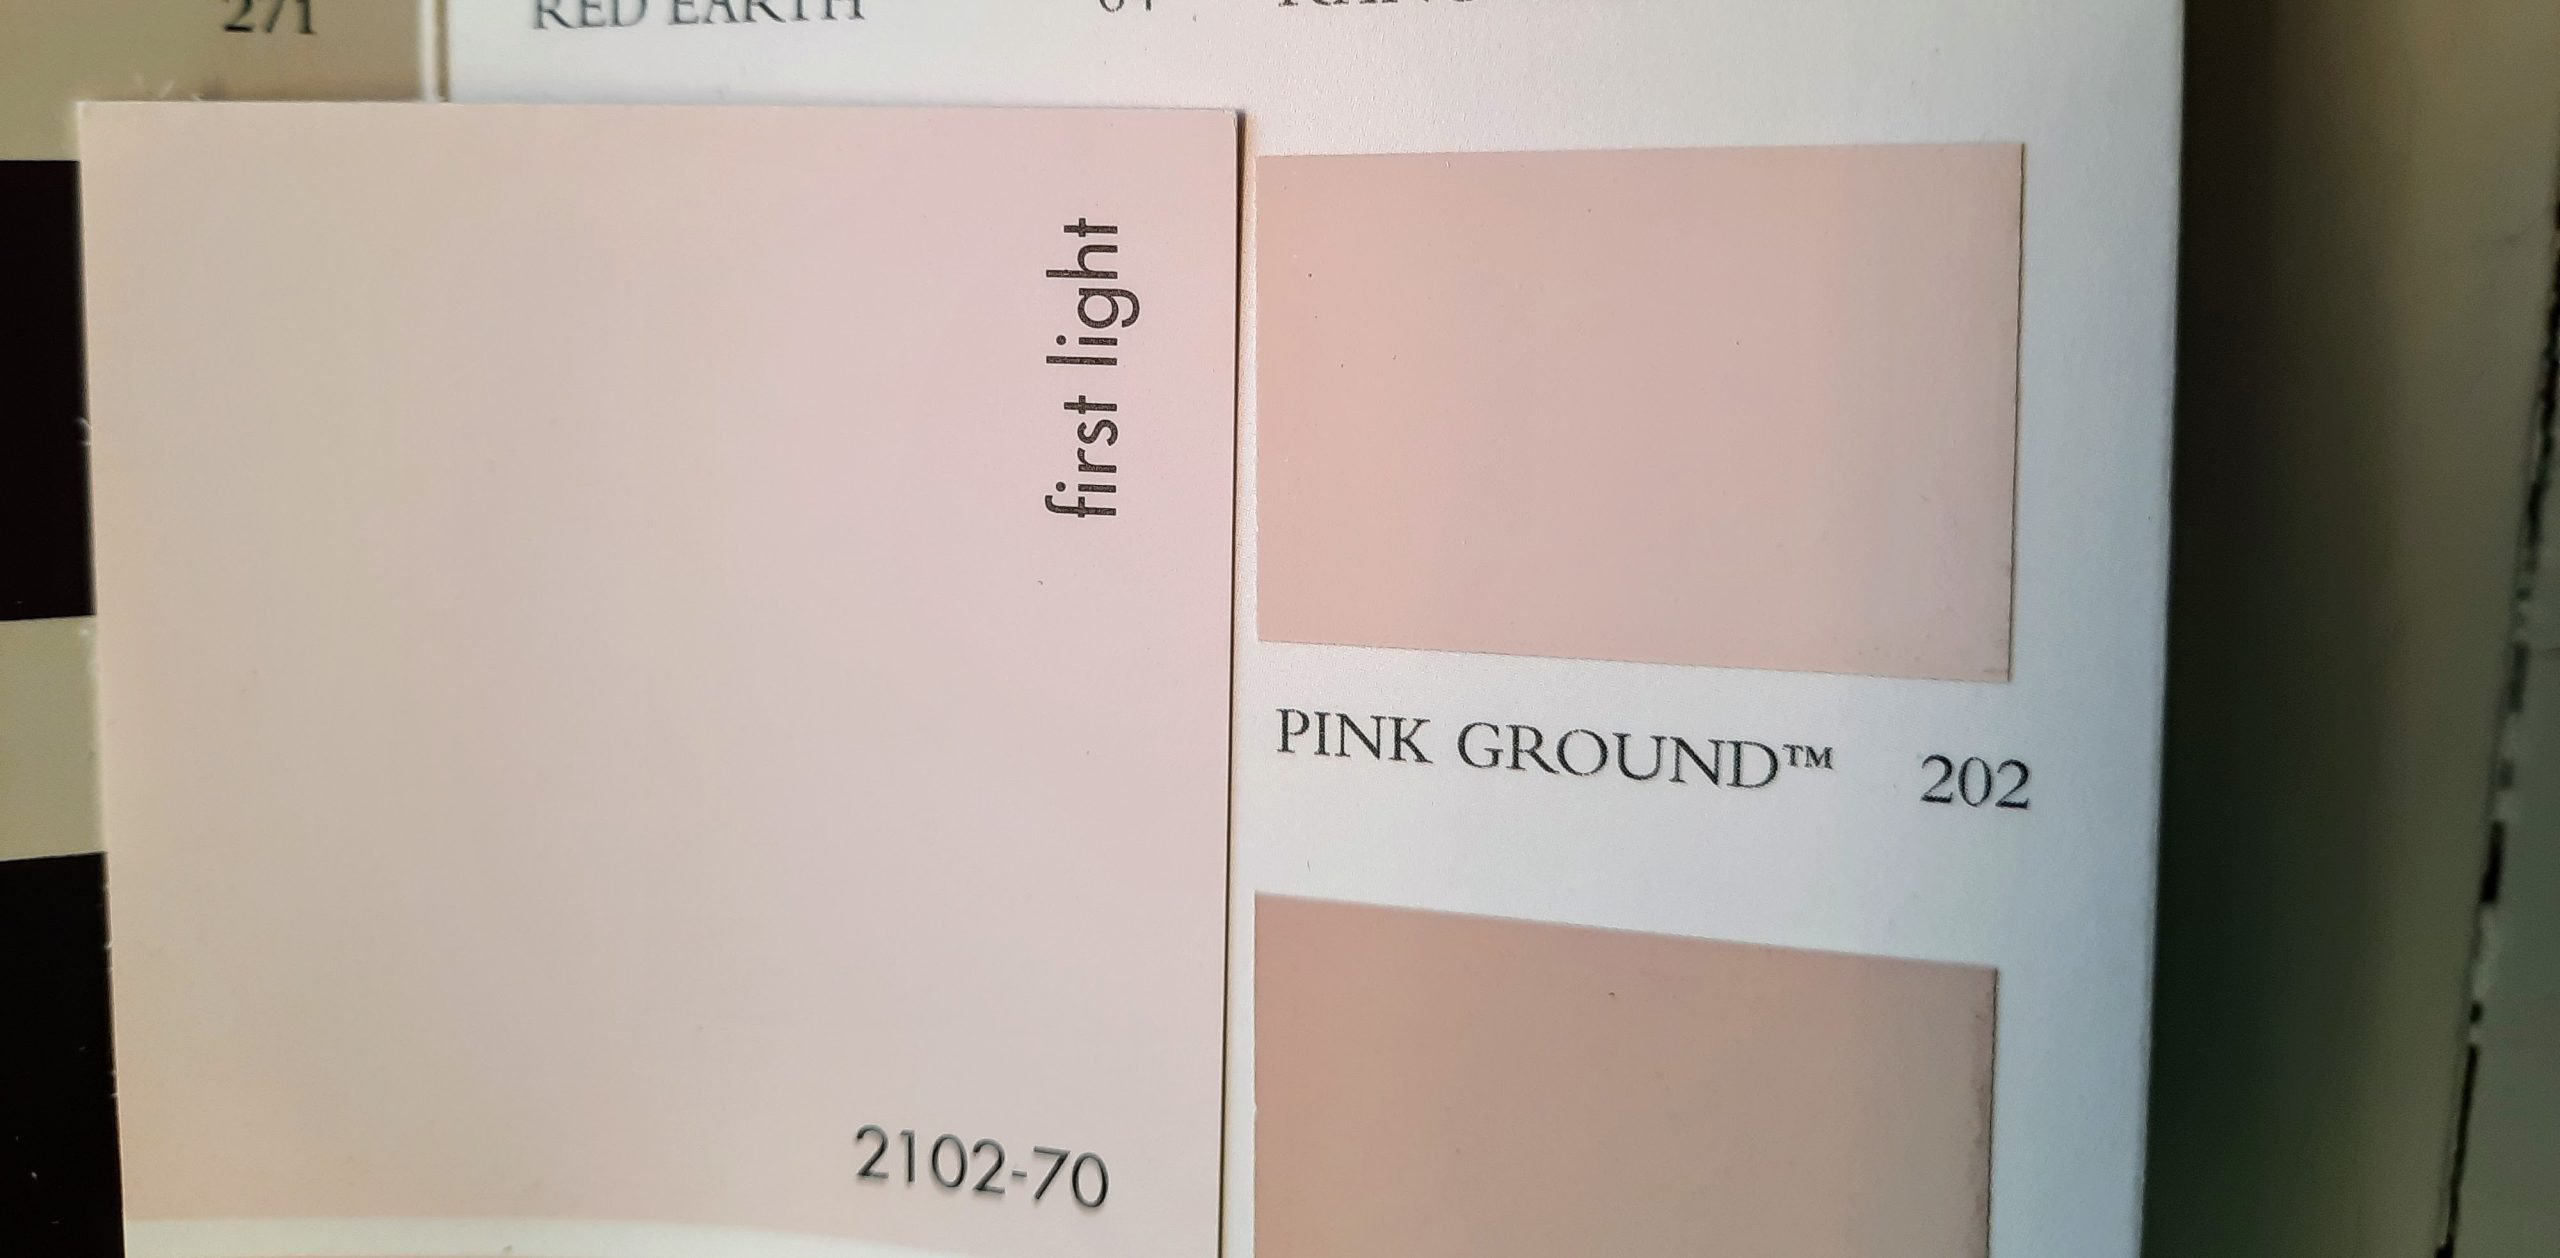 7 First Light vs Pink Ground by Farrow and Ball scaled